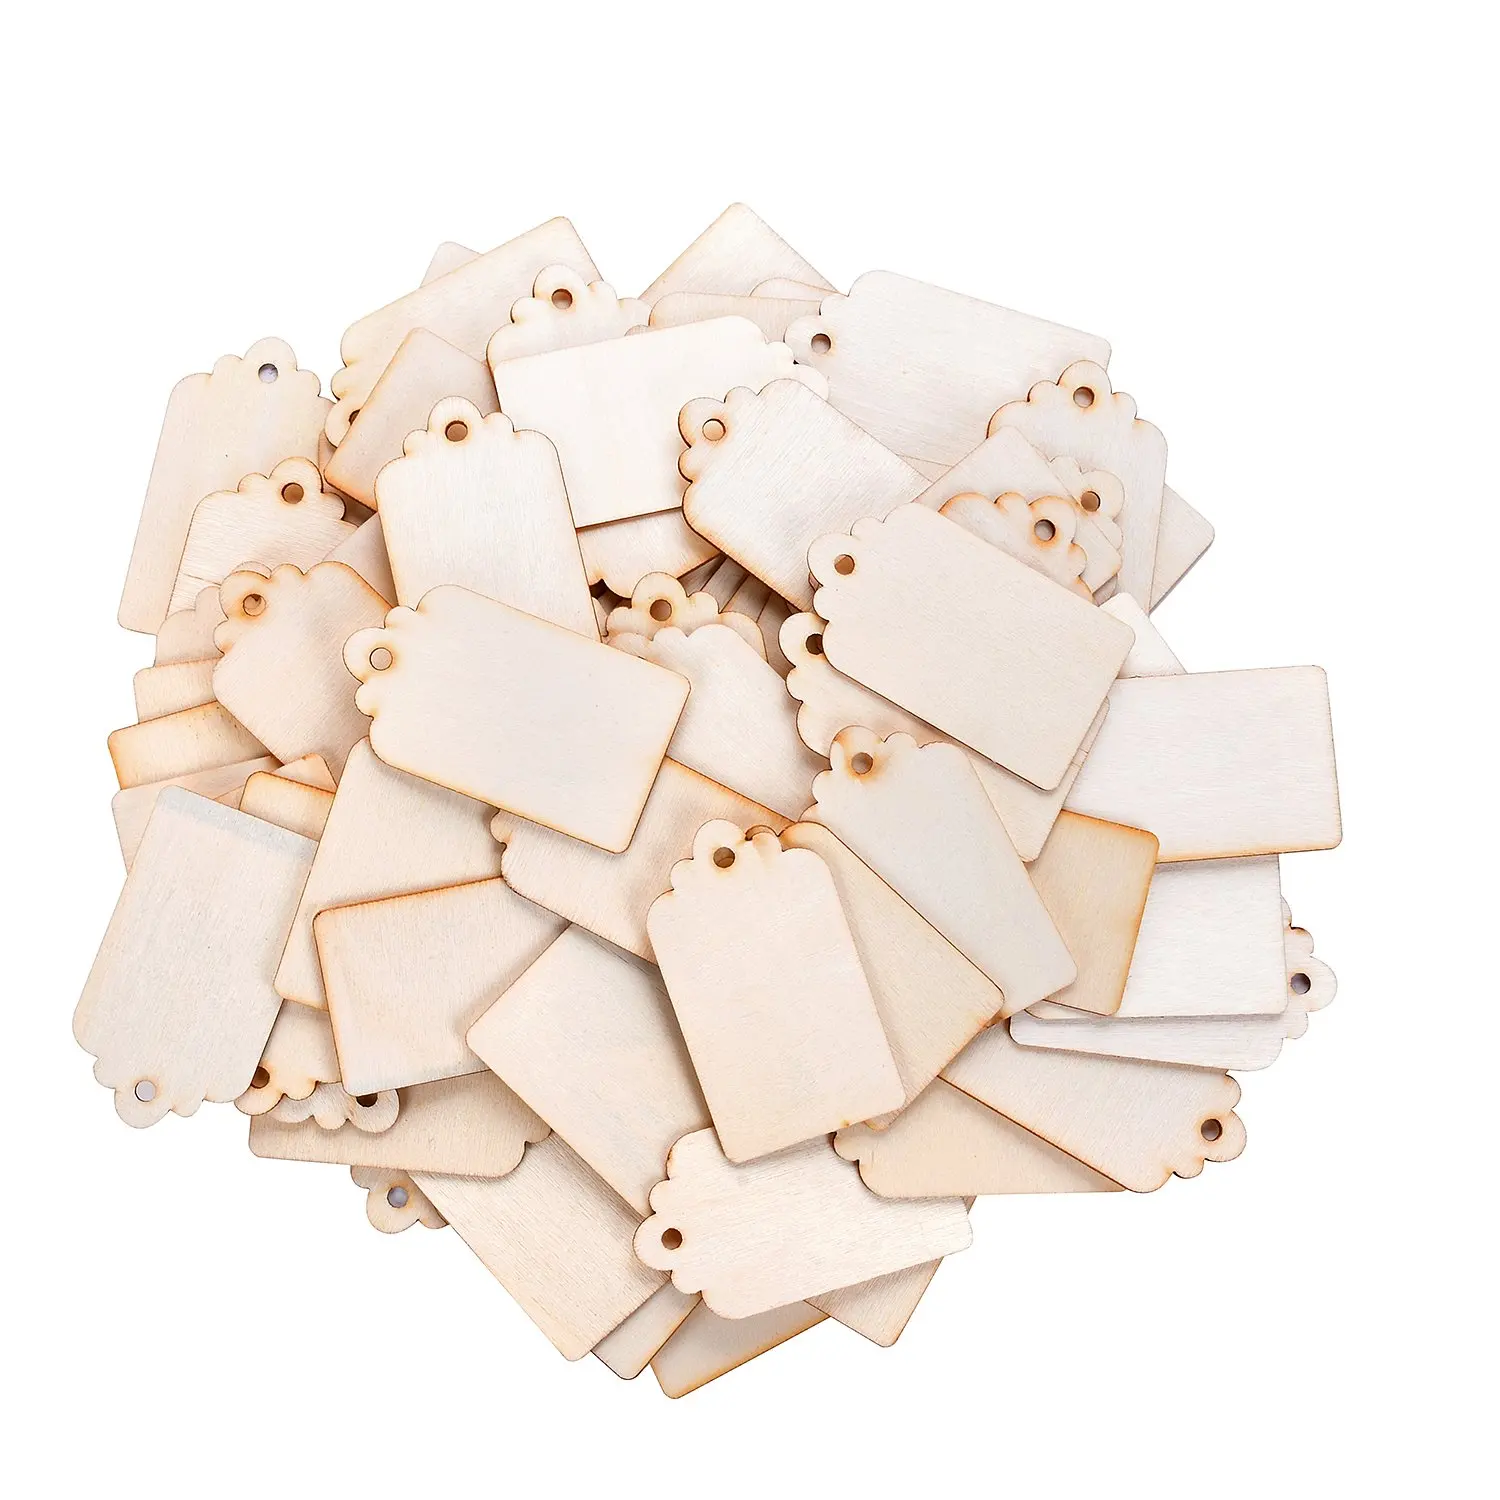 Unfinished Wood Cutout - 100-Pack Classic Cross Shaped Wood Pieces for Wooden  Craft DIY Projects, Sunday School, Church, Home Decoration, 4.1 x 2.6 x 0.1  Inches